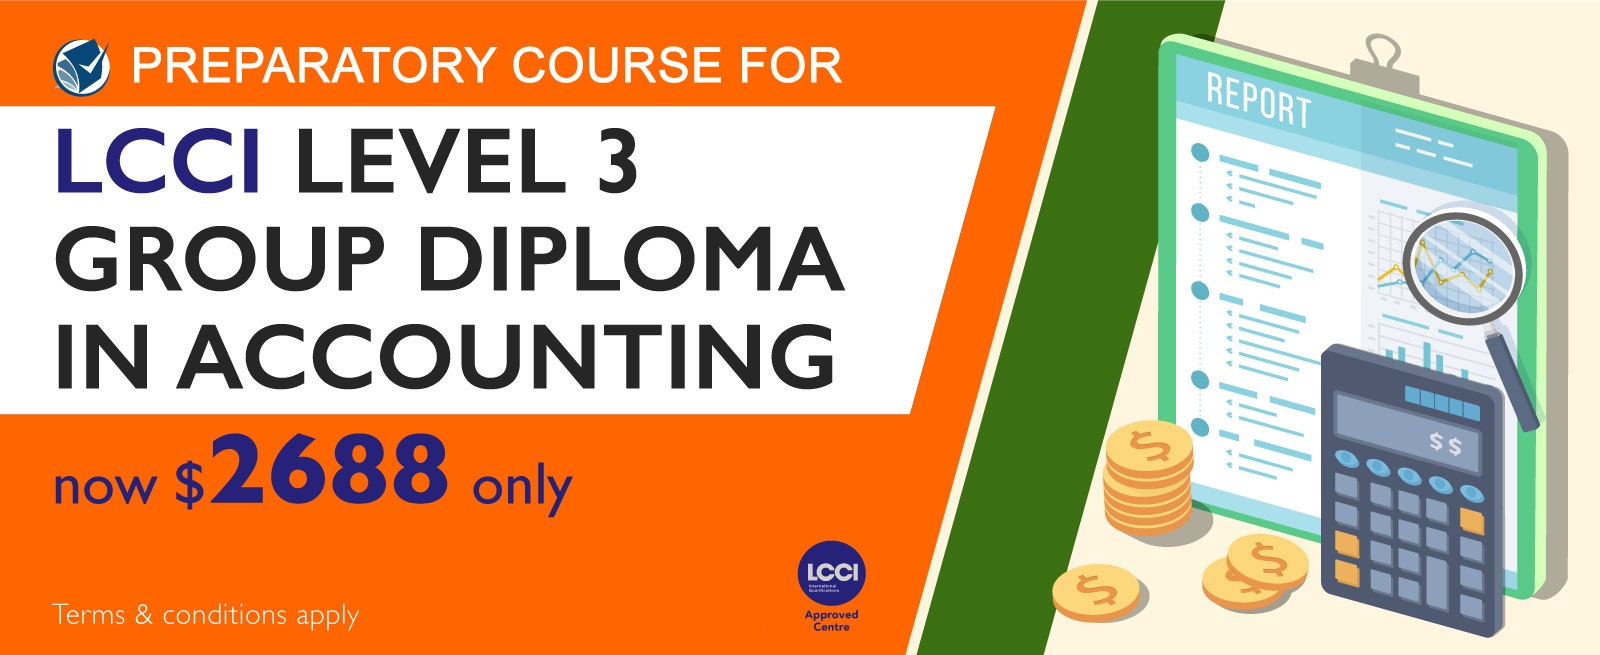 Preparatory Course for Pearson LCCI Level 3 Group Diploma in Accounting